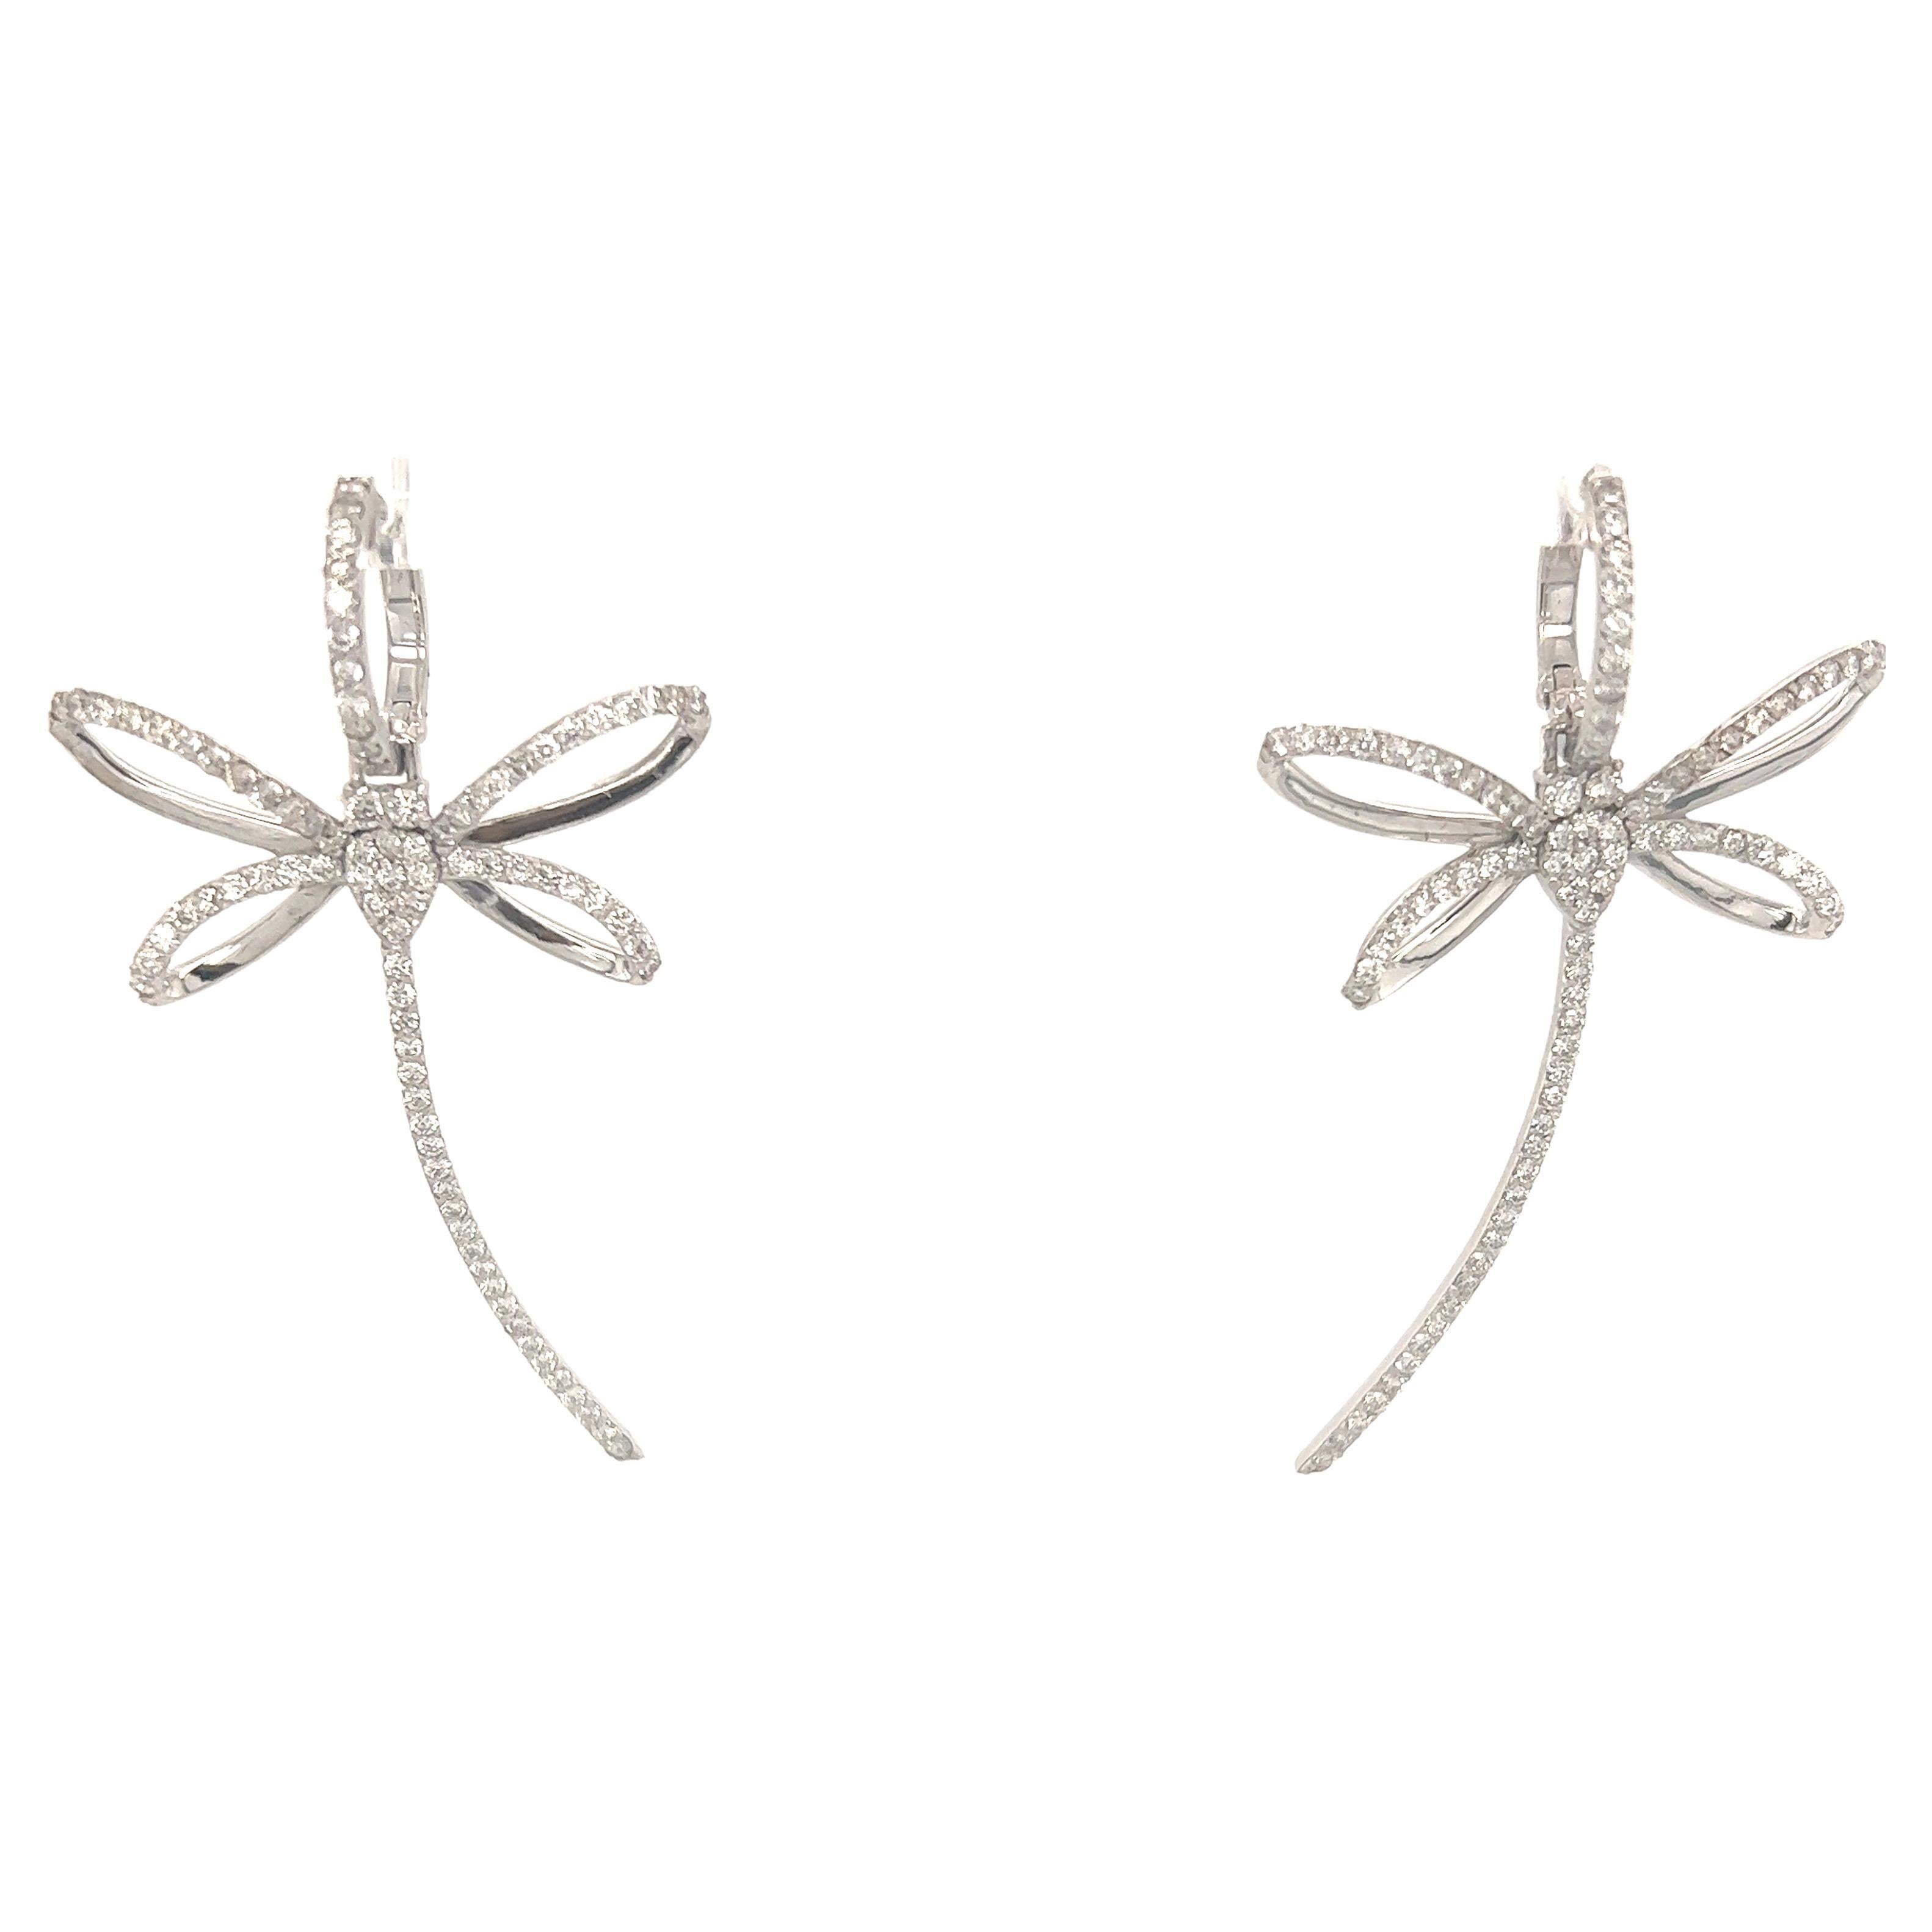 1.47 Carat Natural Diamond White Gold Cocktail Earrings